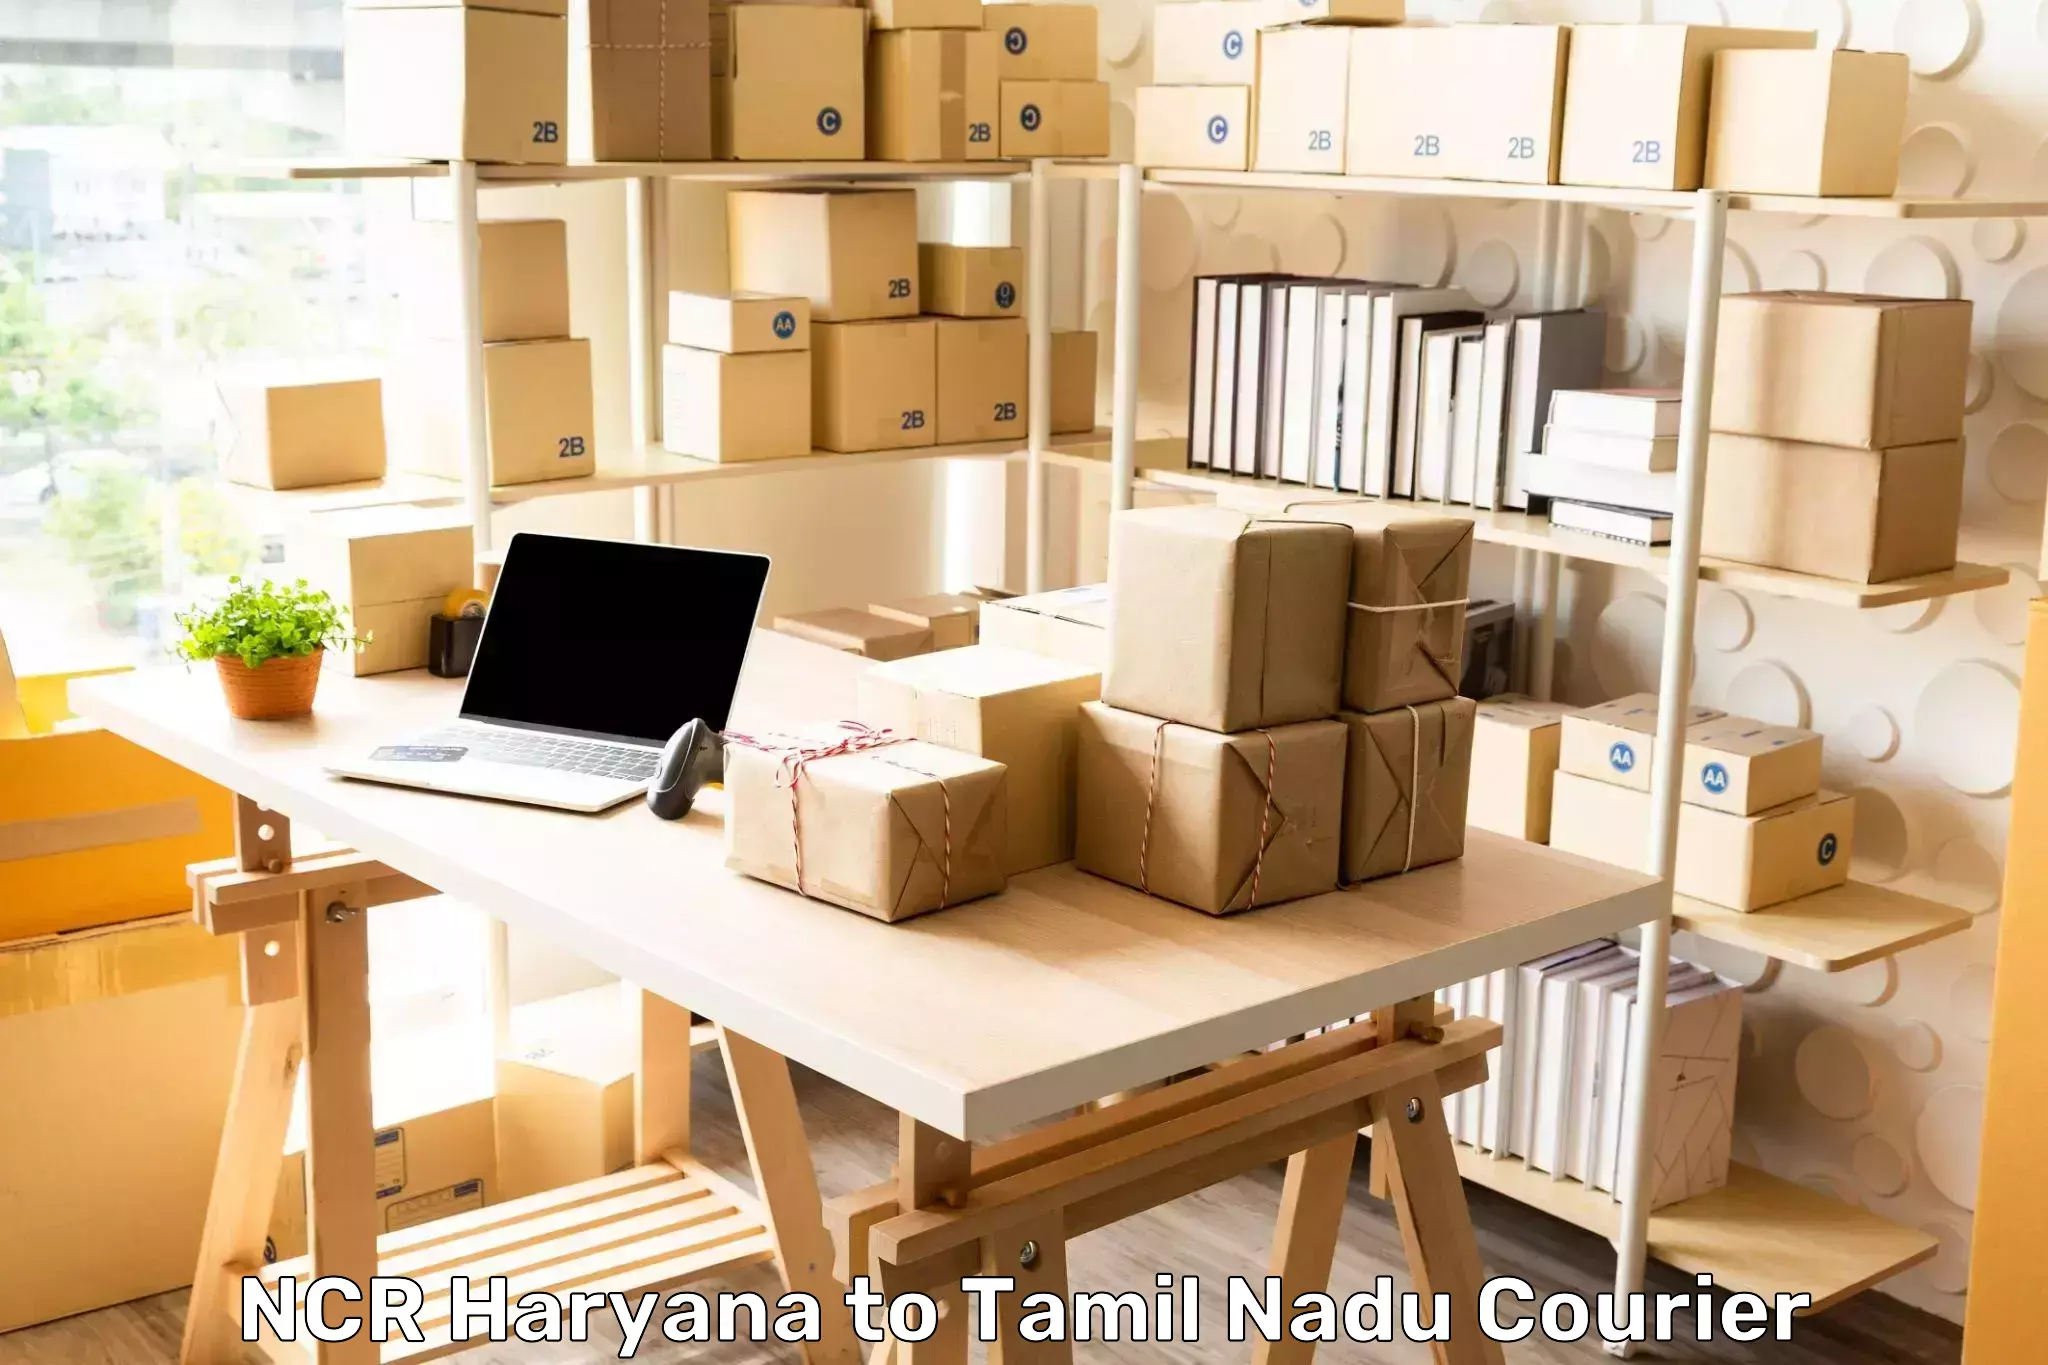 Global shipping solutions NCR Haryana to Muthukulathur